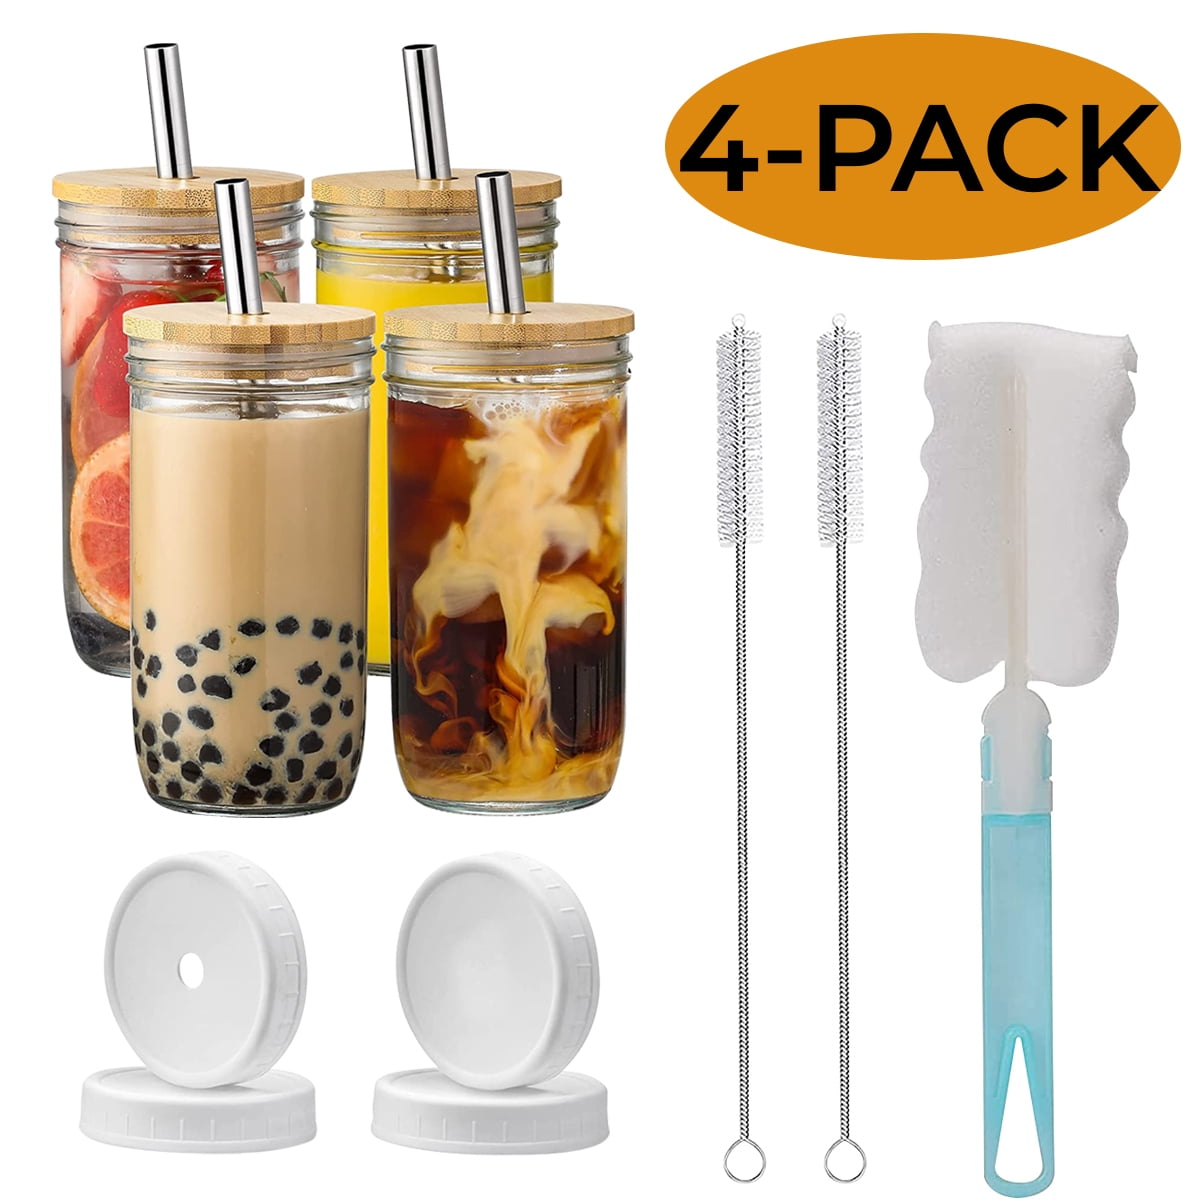 Bulk Case Vinyl Beer Glass Sets (Glass, Bamboo Lid and Glass Straw 48 SETS )